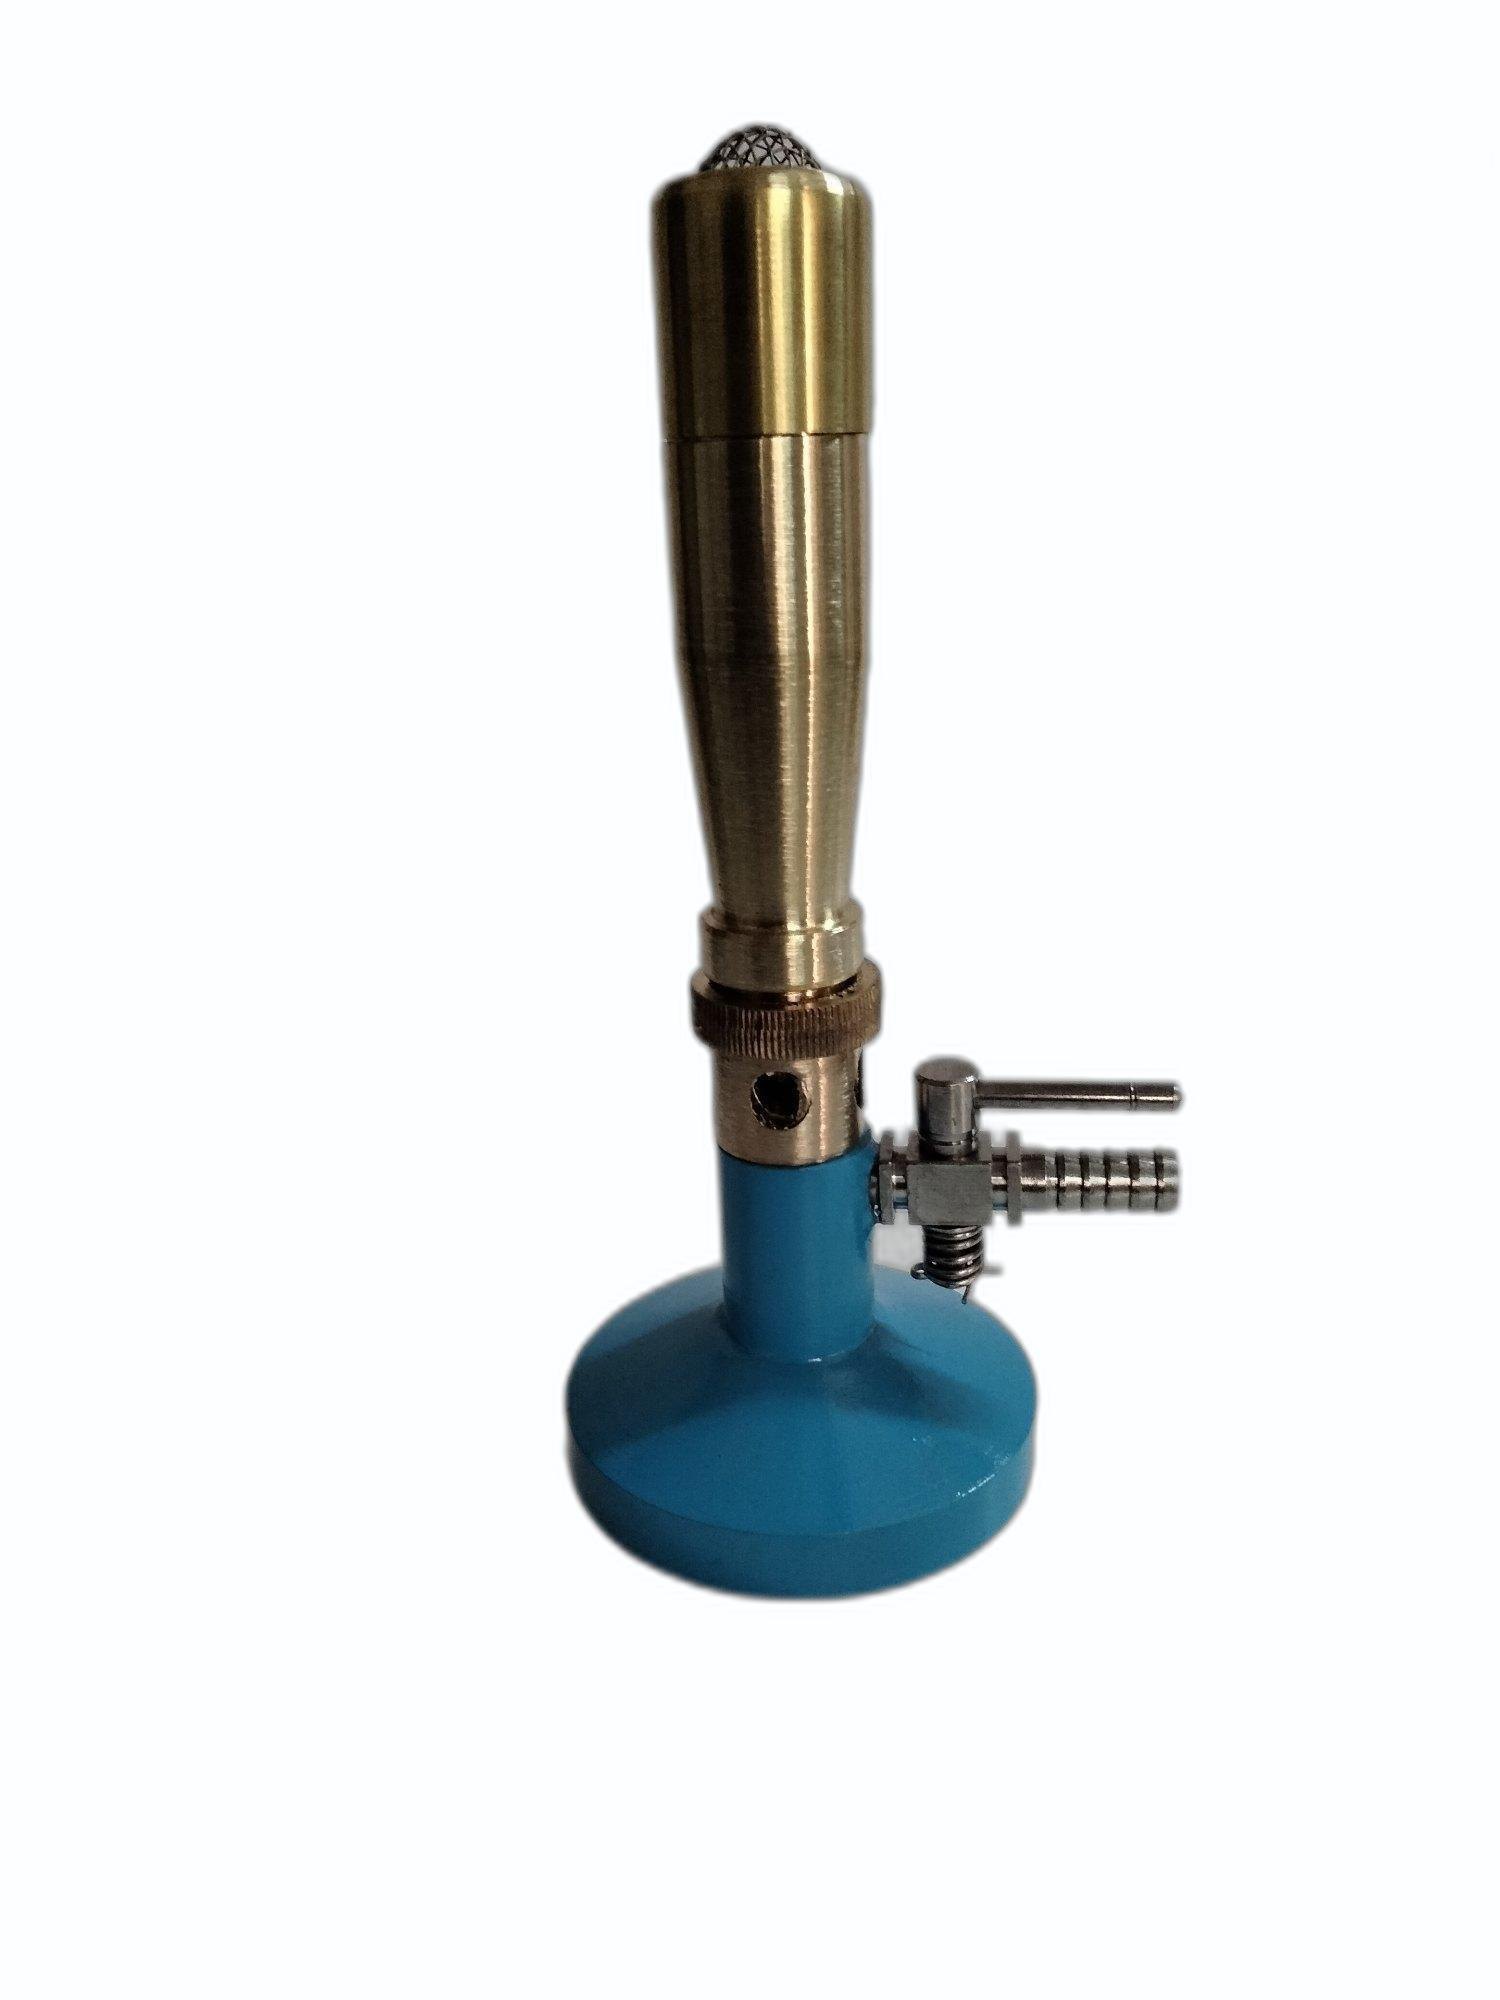 bunsen-burner-meaker-type-without-heavy-stop-cock-model-106-12